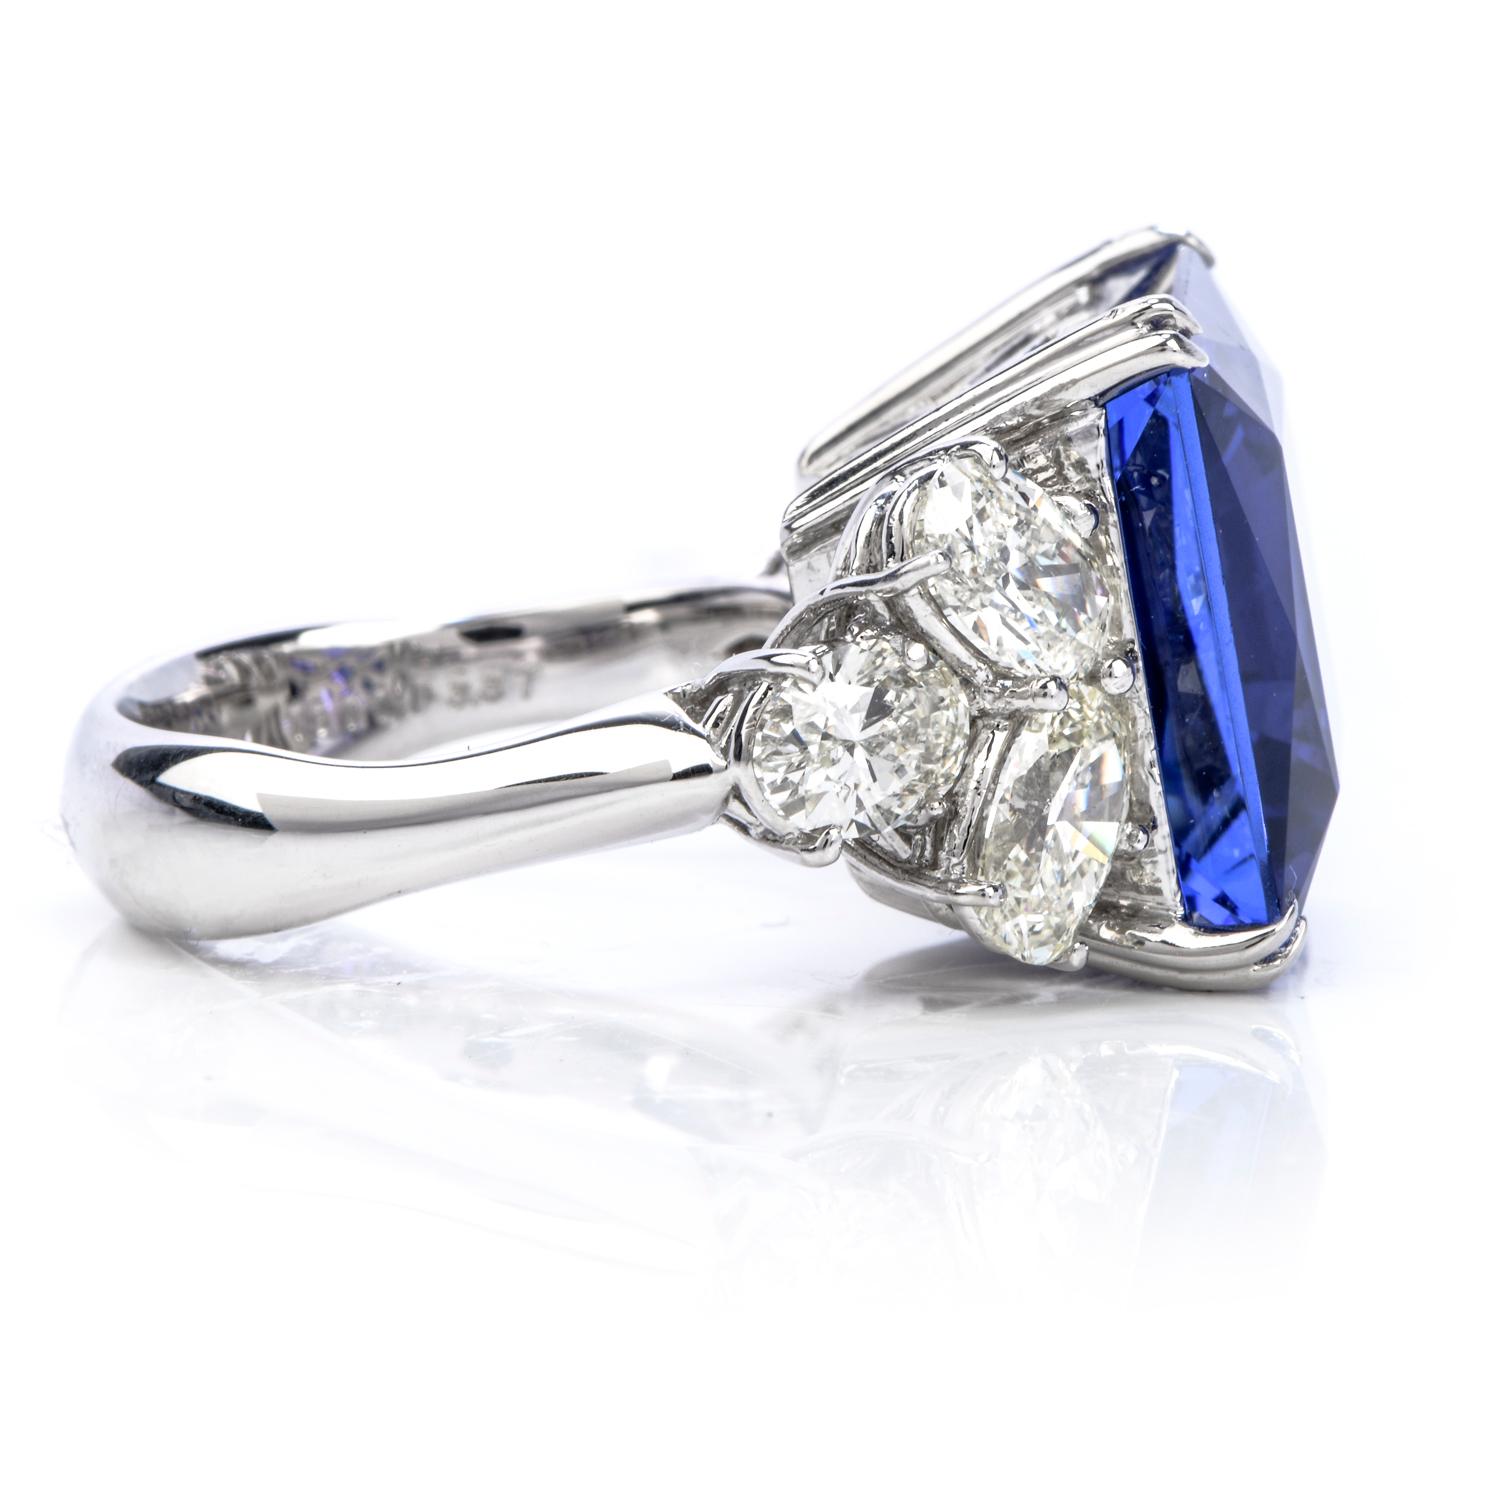 This magnificent dazzling Estate piece is crafted in Pt800 solid Platinum and is centered with a vivid square cut GIA certified Tanzanite of 18.01 carats, prong set.

The beautiful color of the center stone is all the more enhanced by 6 genuine pear